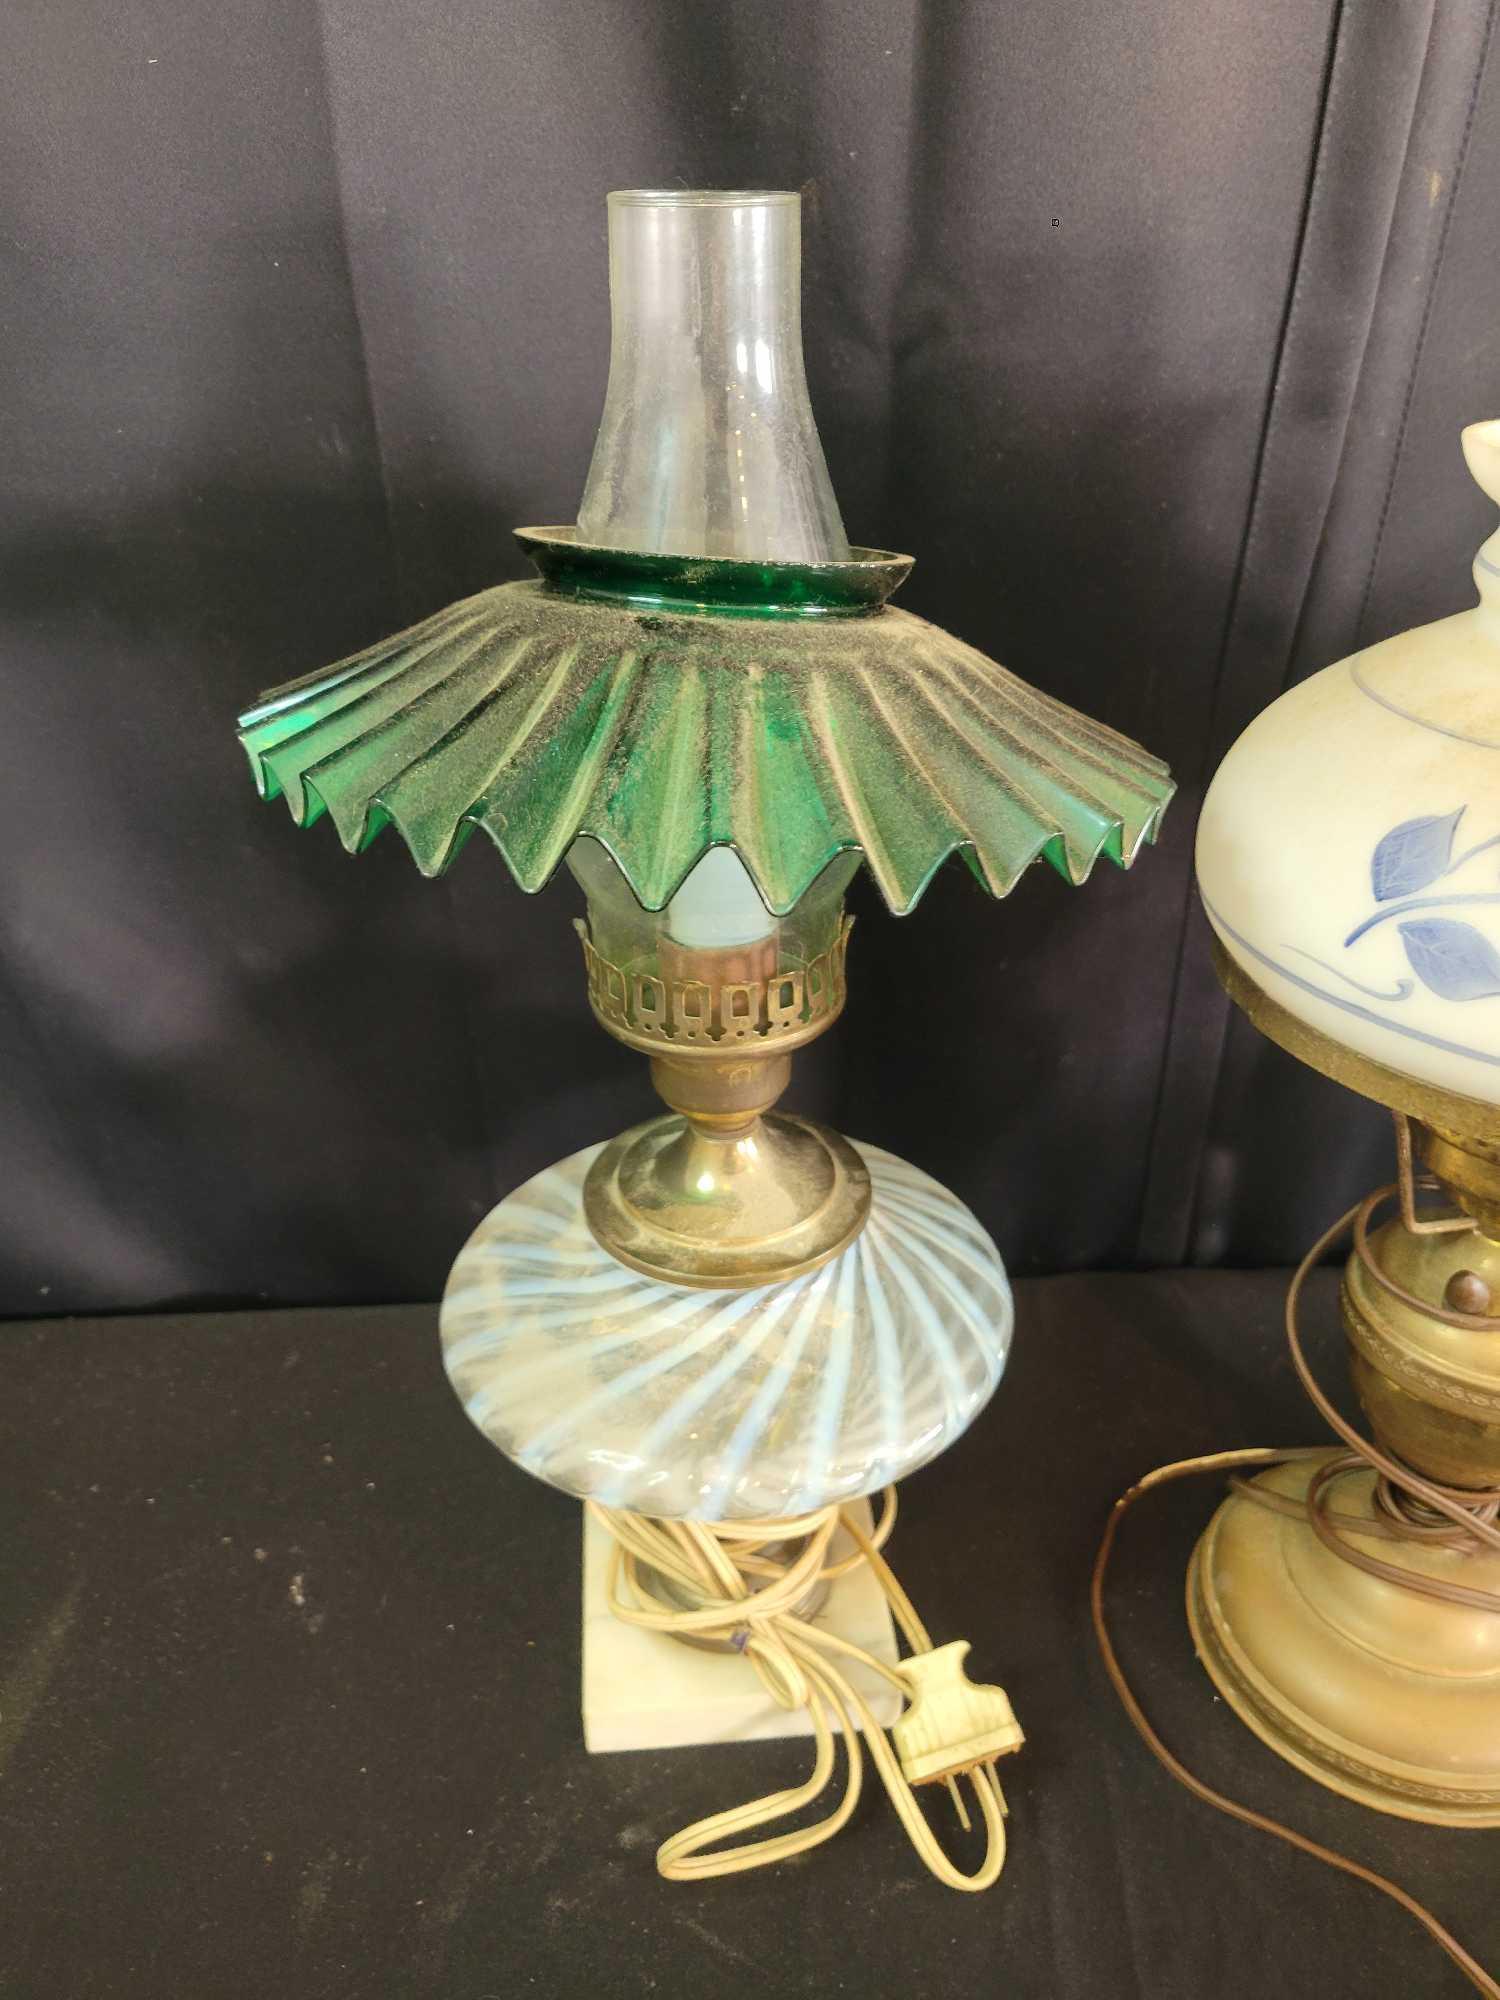 Fenton opalescent base lamp with green glass smoke shade, satin electrifies painted lamps, marble